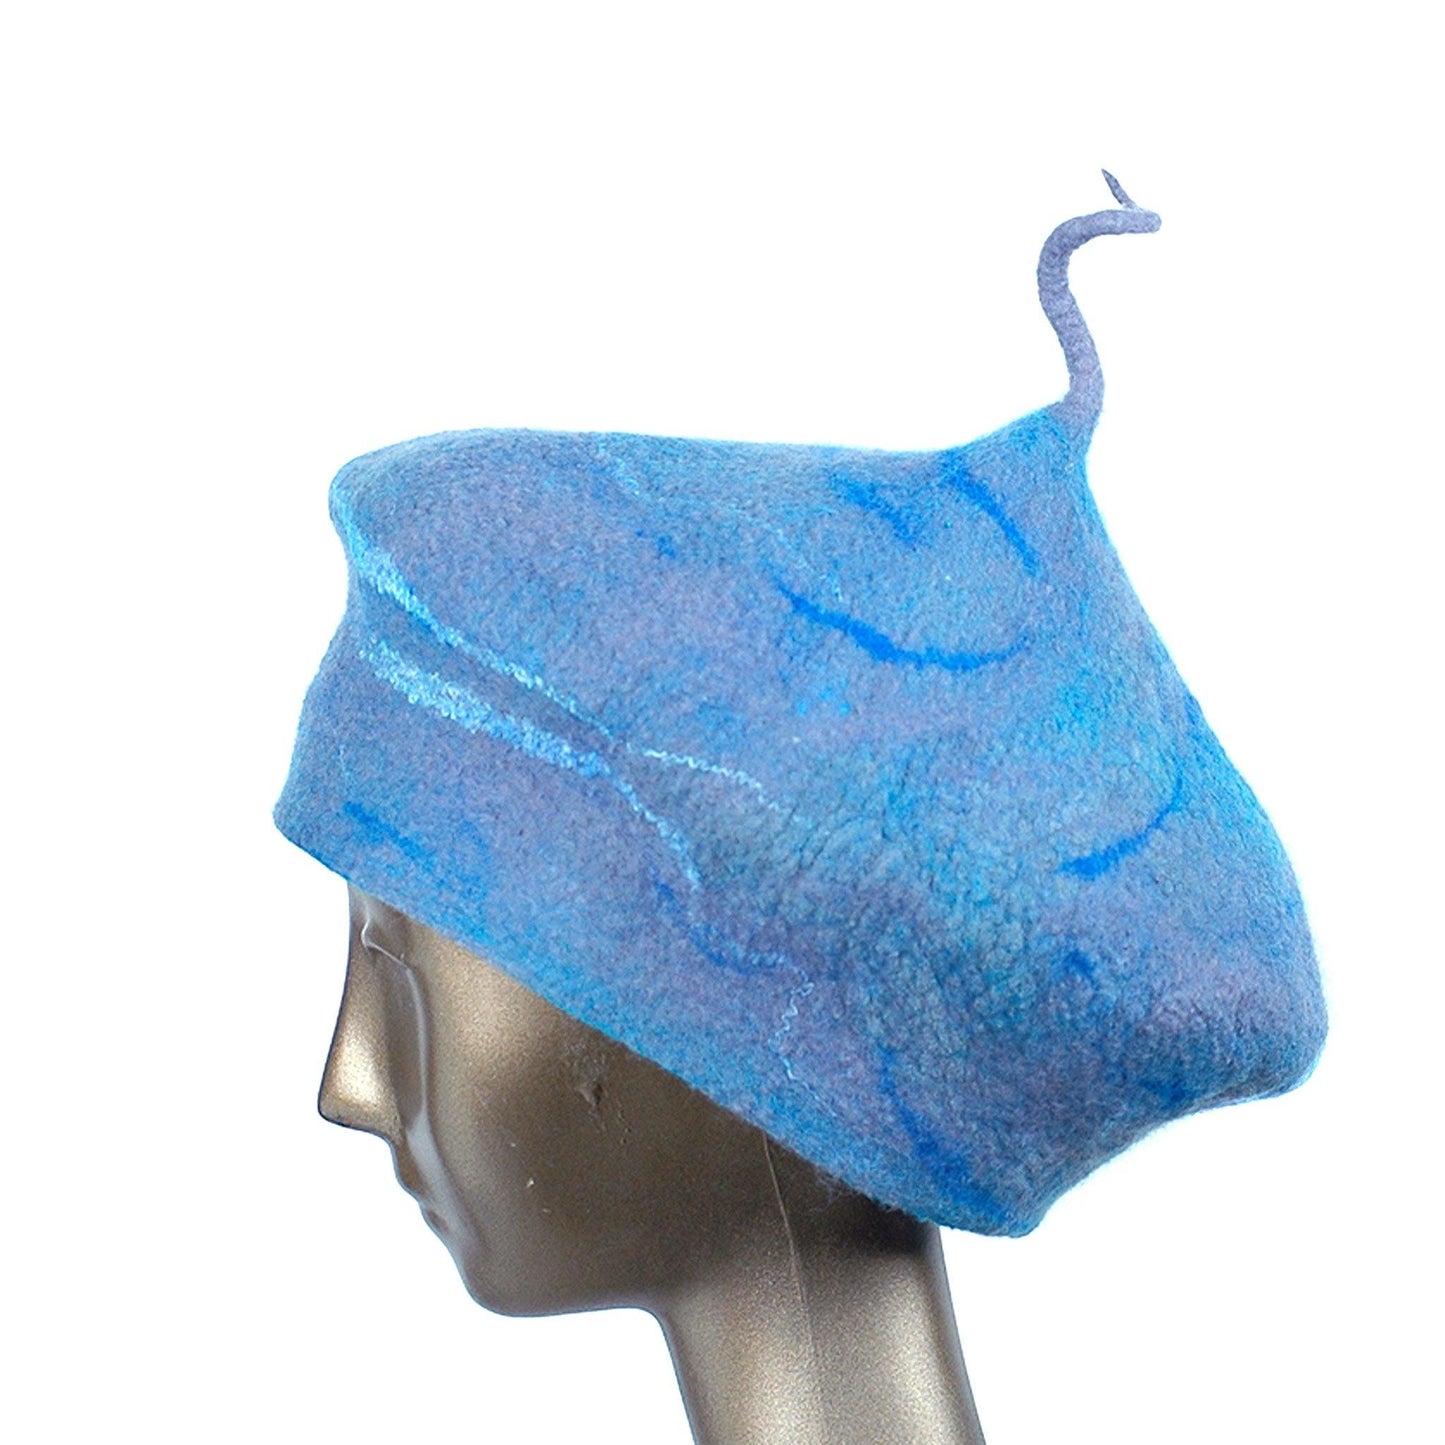 Playful Blue Gray Beret with Curlicue Stem - side view